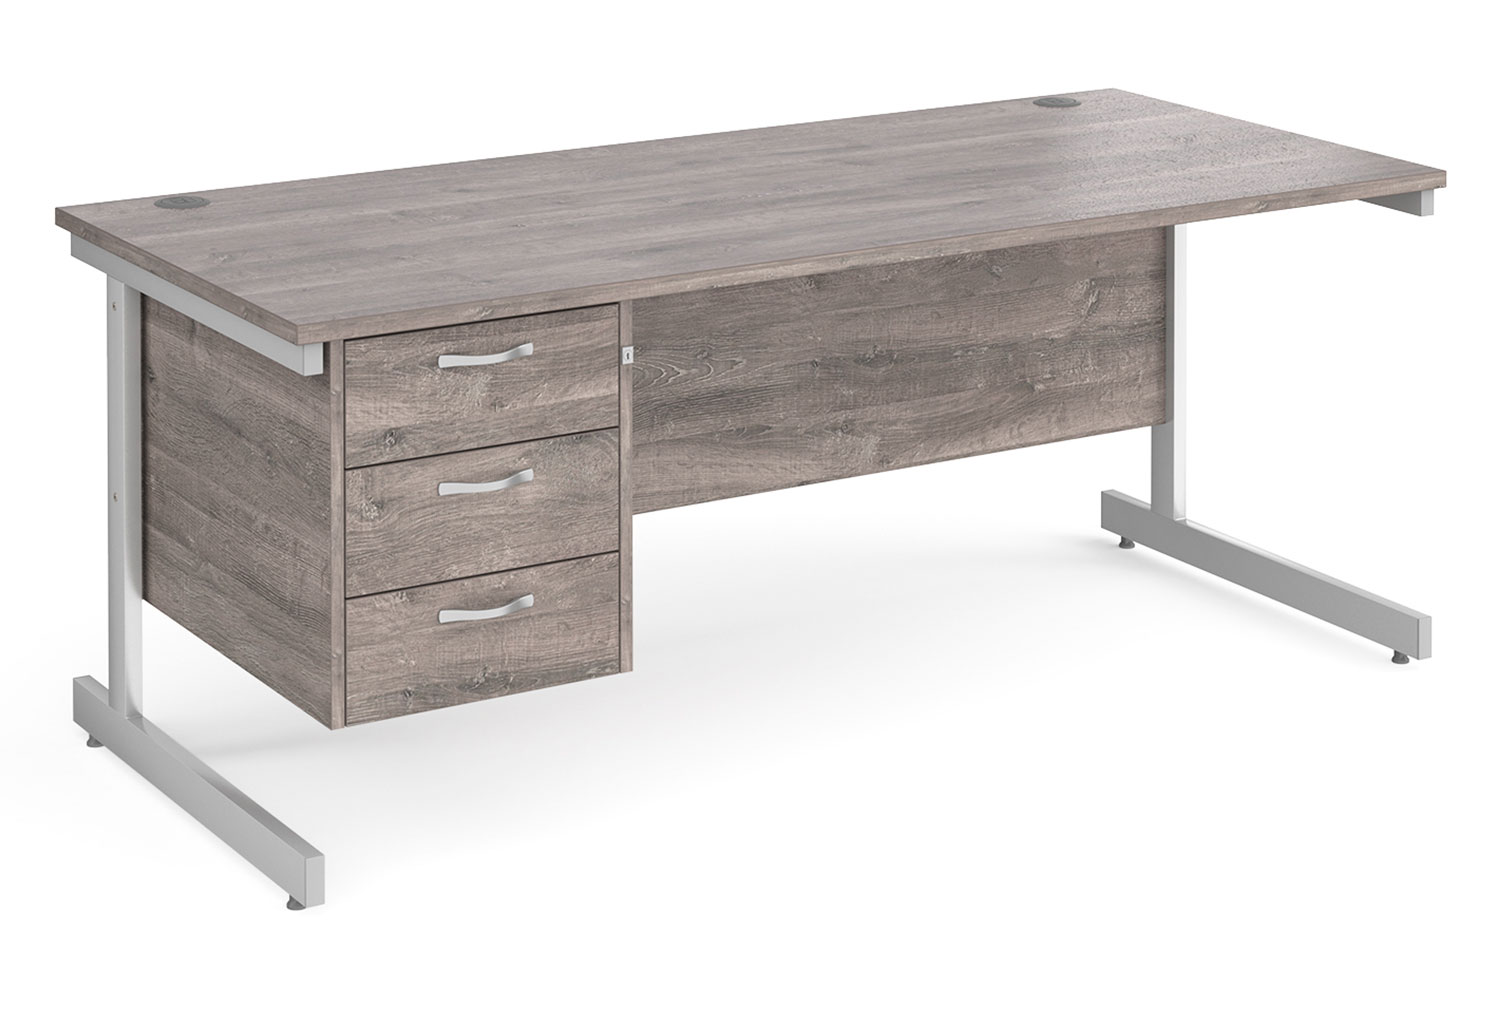 All Grey Oak C-Leg Clerical Office Desk 3 Drawer, 180wx80dx73h (cm), Express Delivery